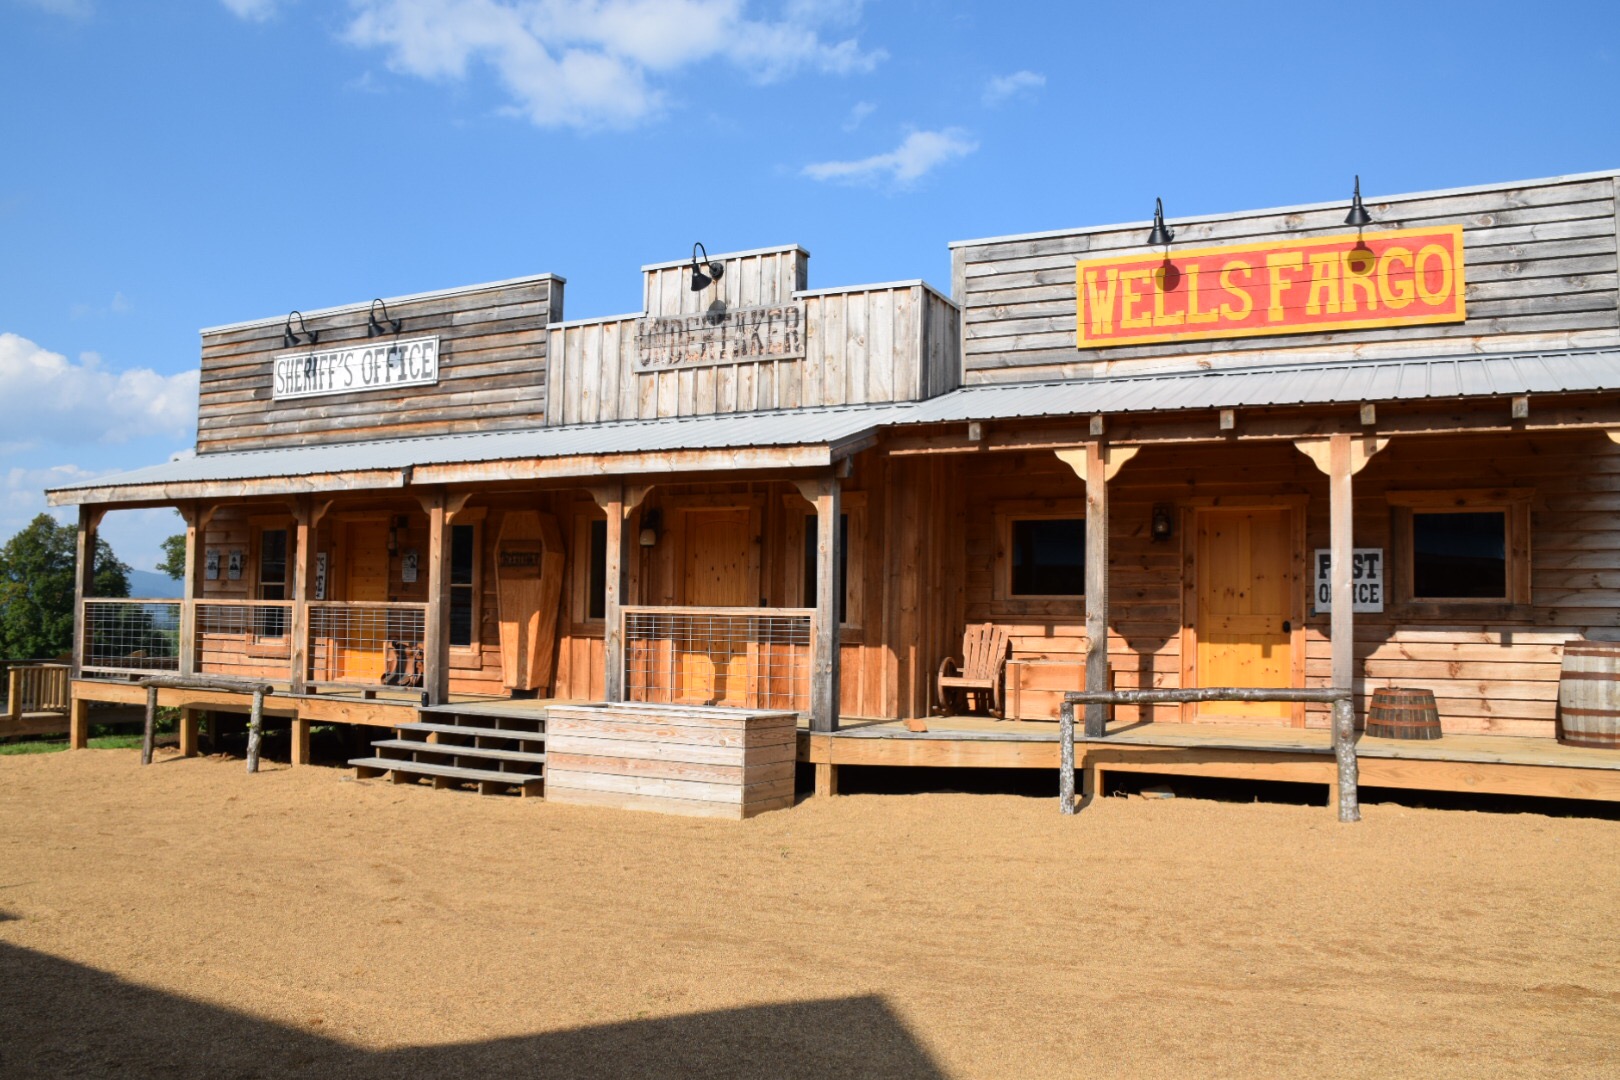 accommodations, old west town, luxury venue, western movie set